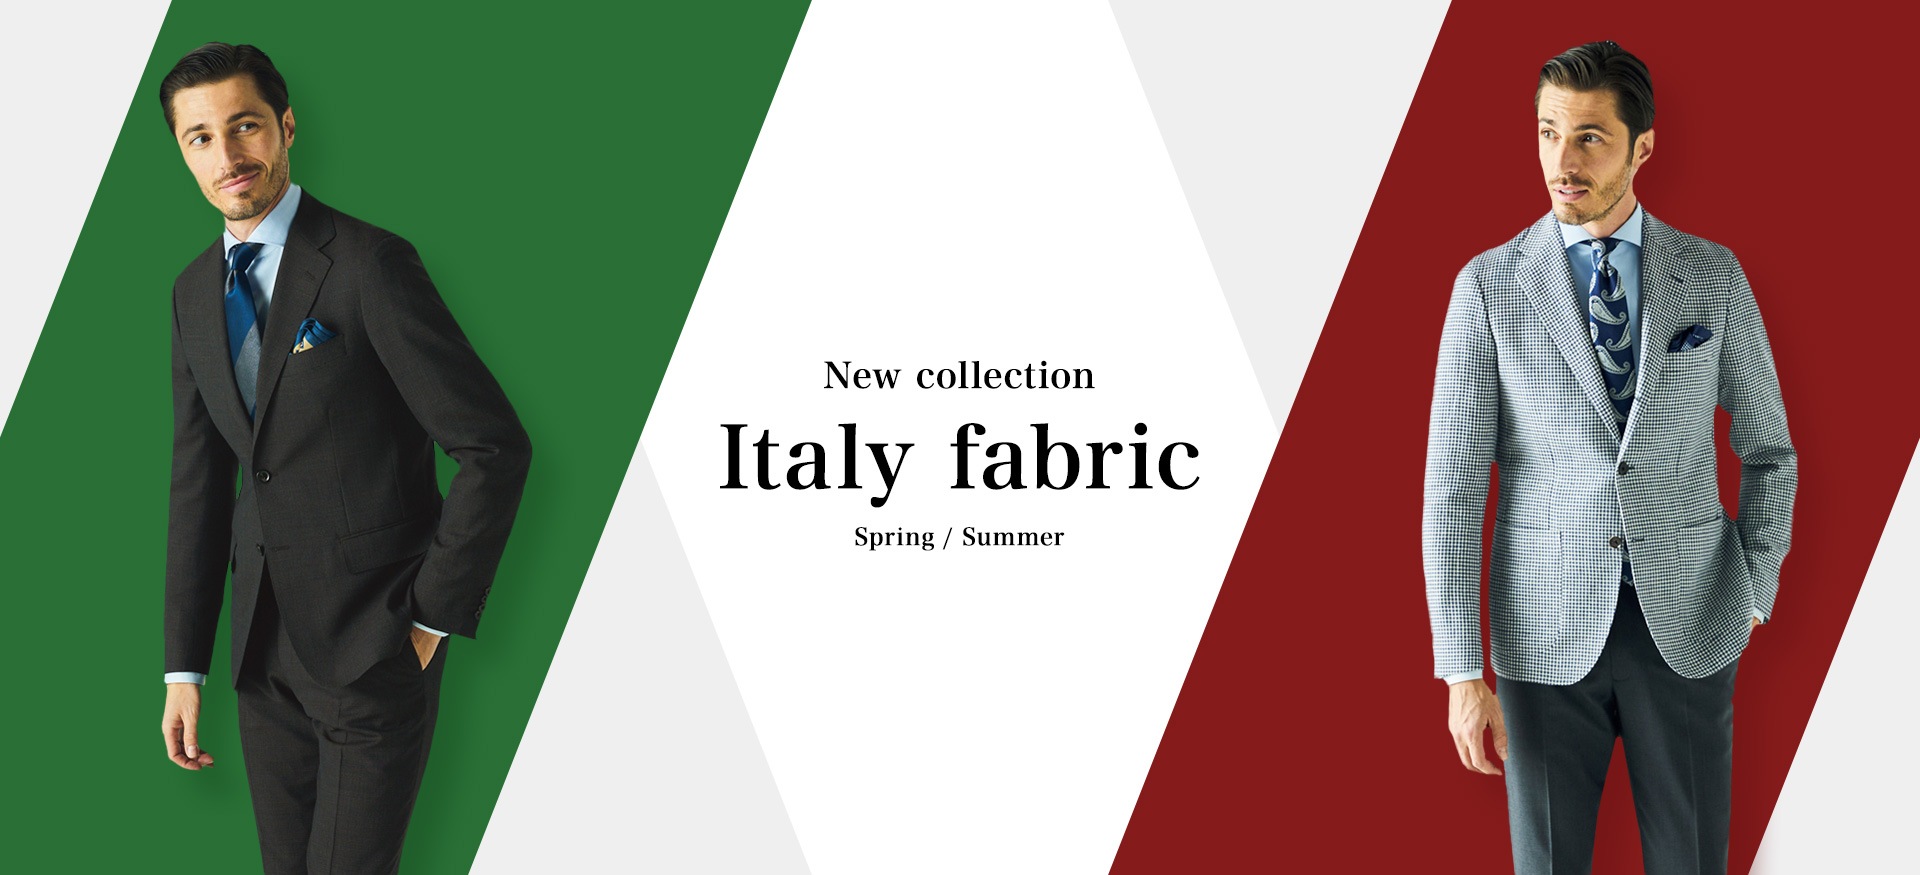 New collection Italy fabric spring/summer